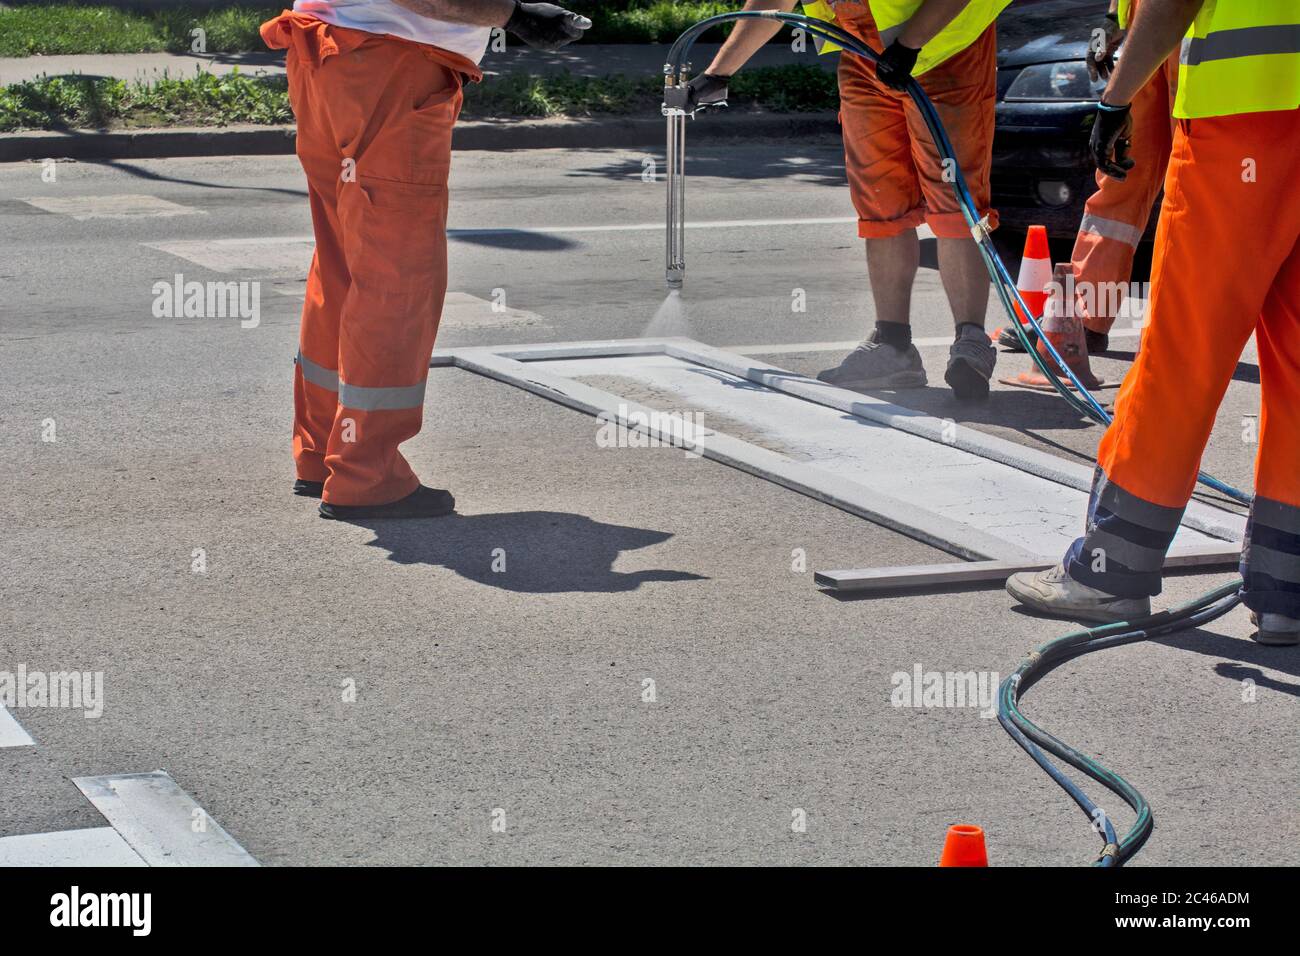 Workers are painting a stop line in a city street. Stock Photo